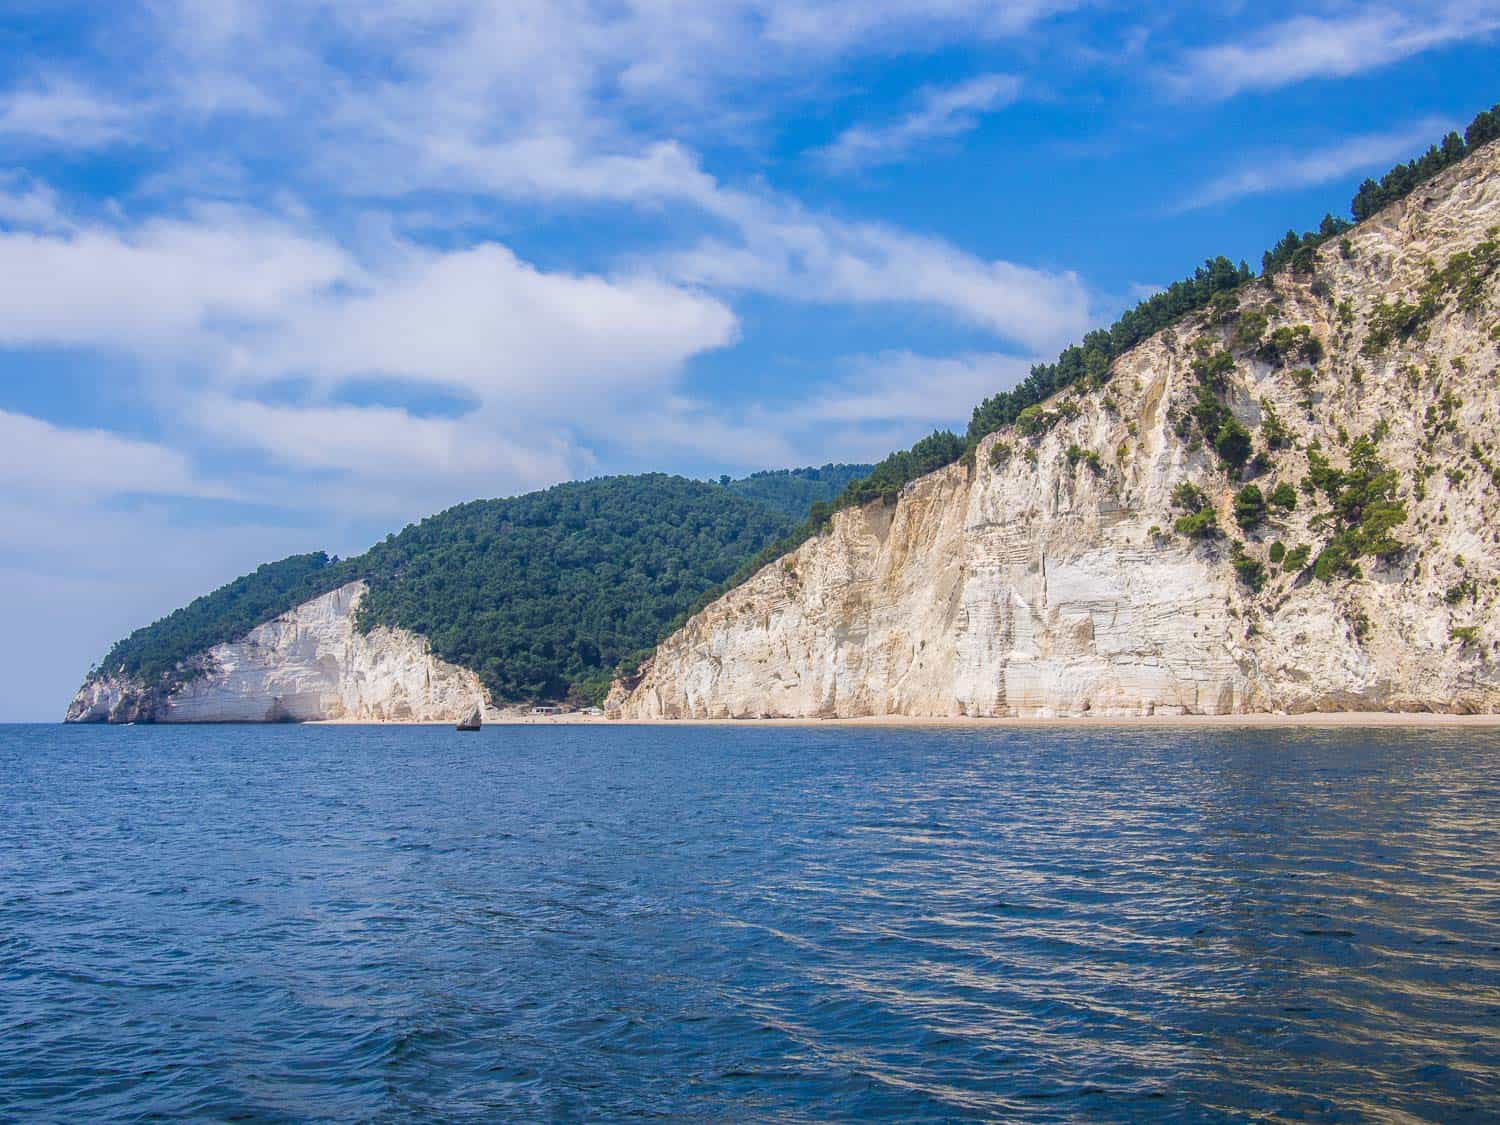 Beach views on the boat tour to the grottoes - one of the best things to do in Vieste Italy